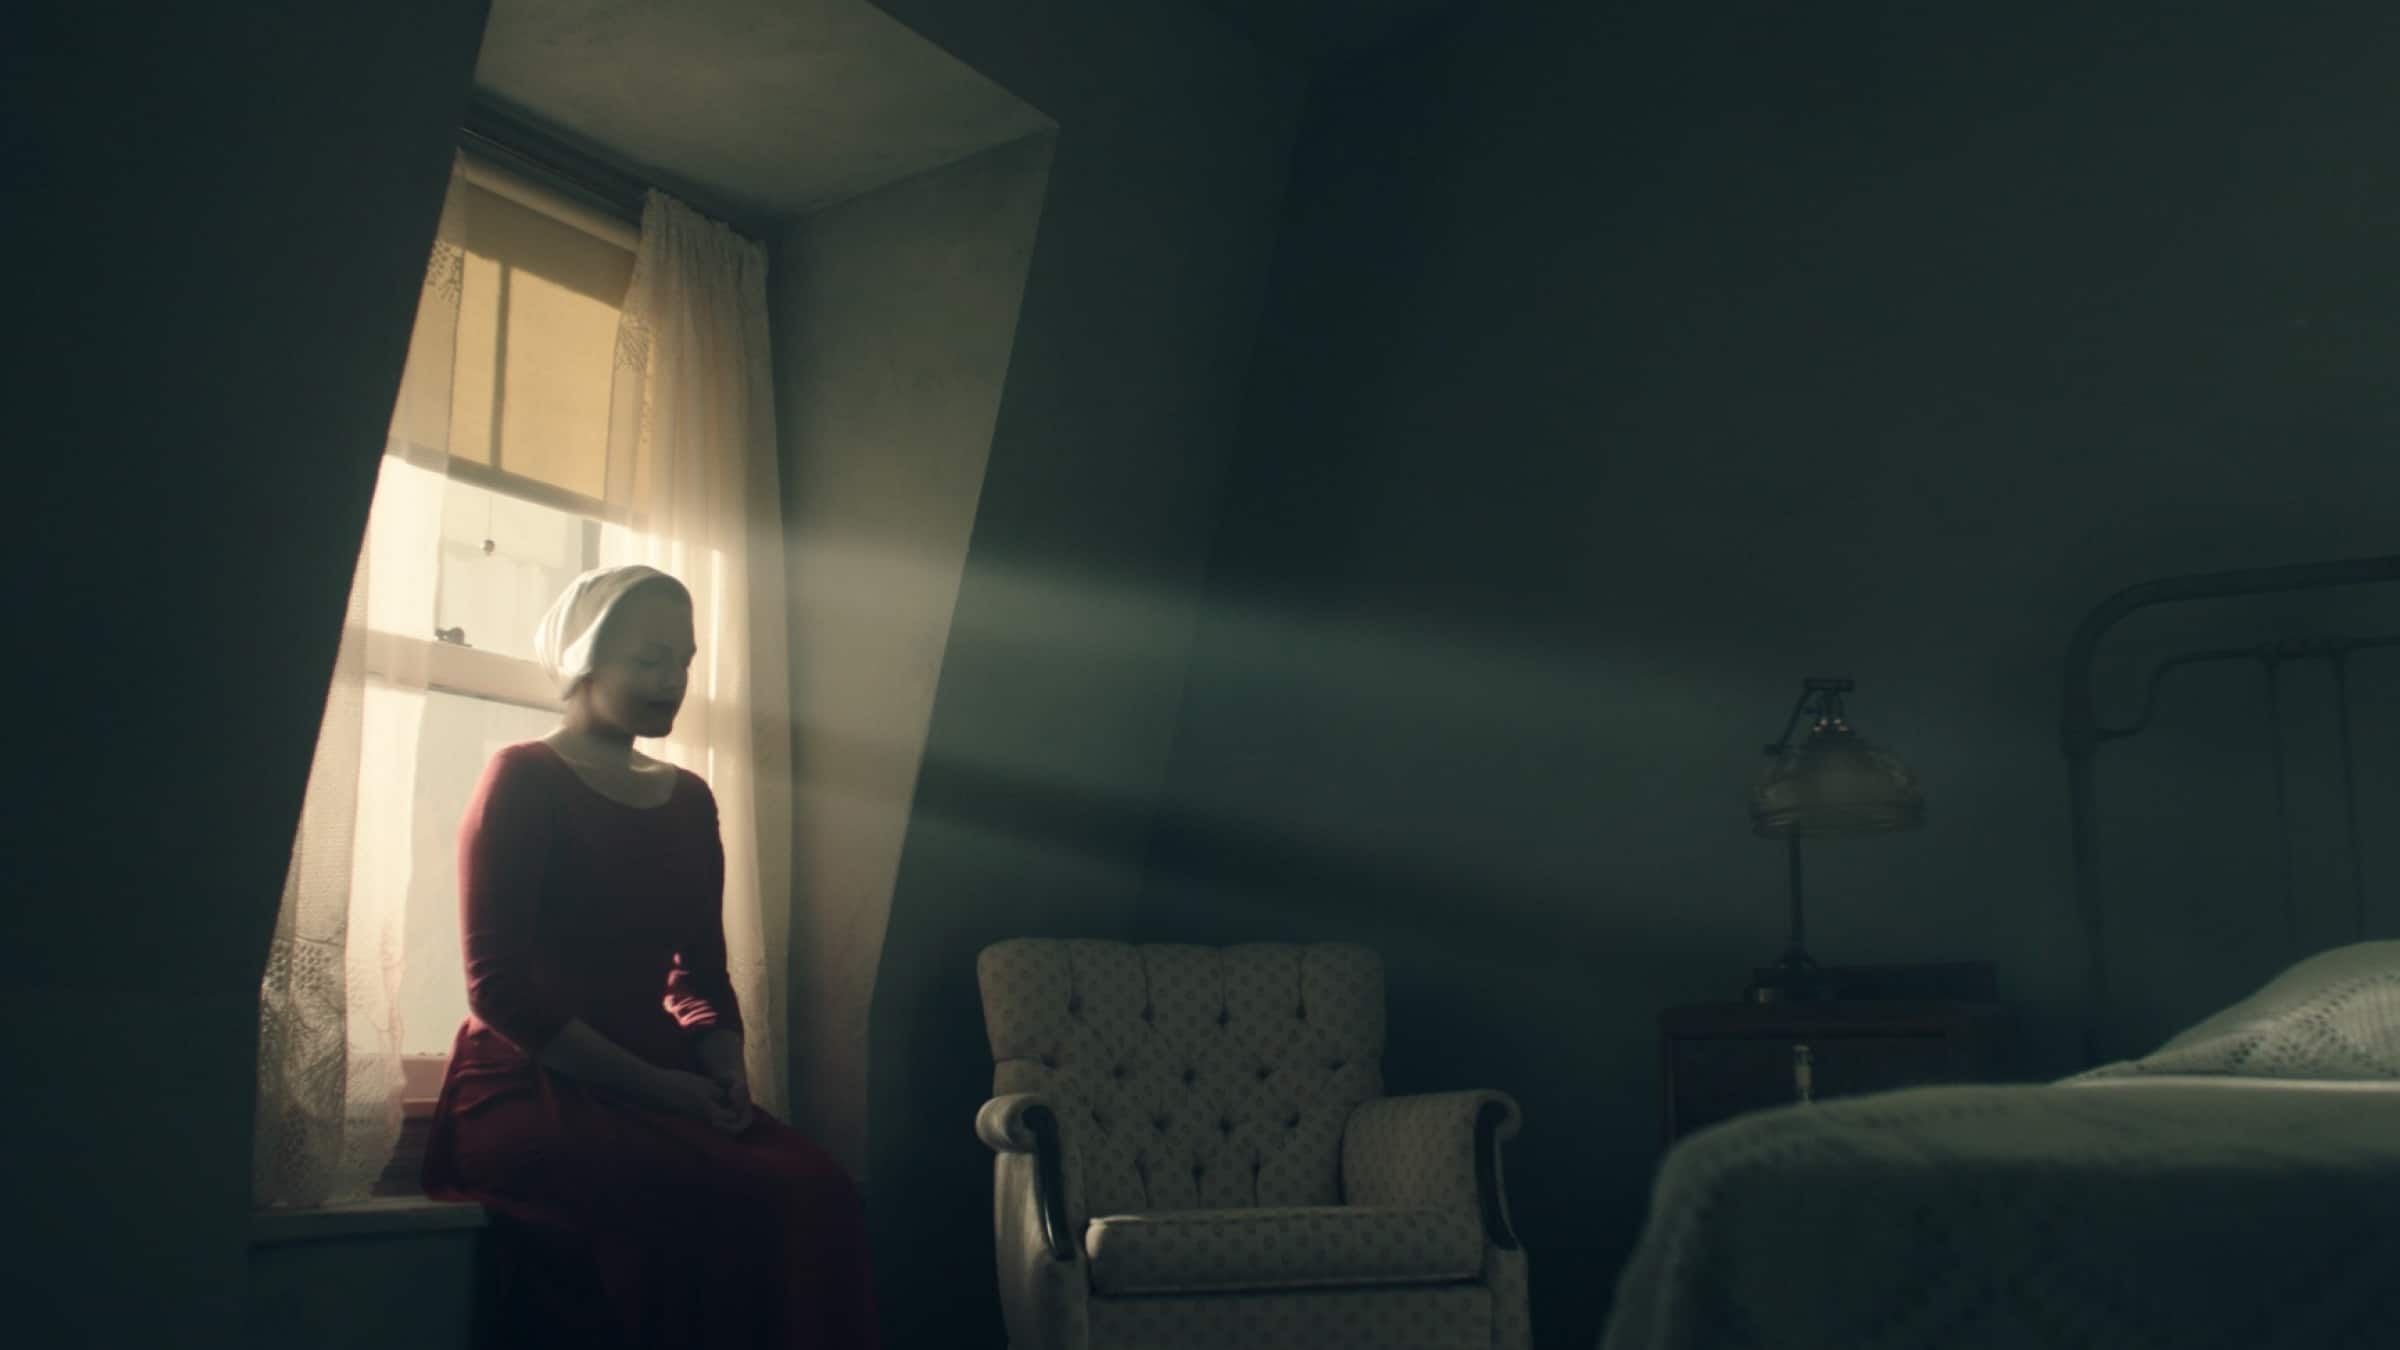 The Handmaid's Tale : Chapter 2 analysis photo, Offred in her room